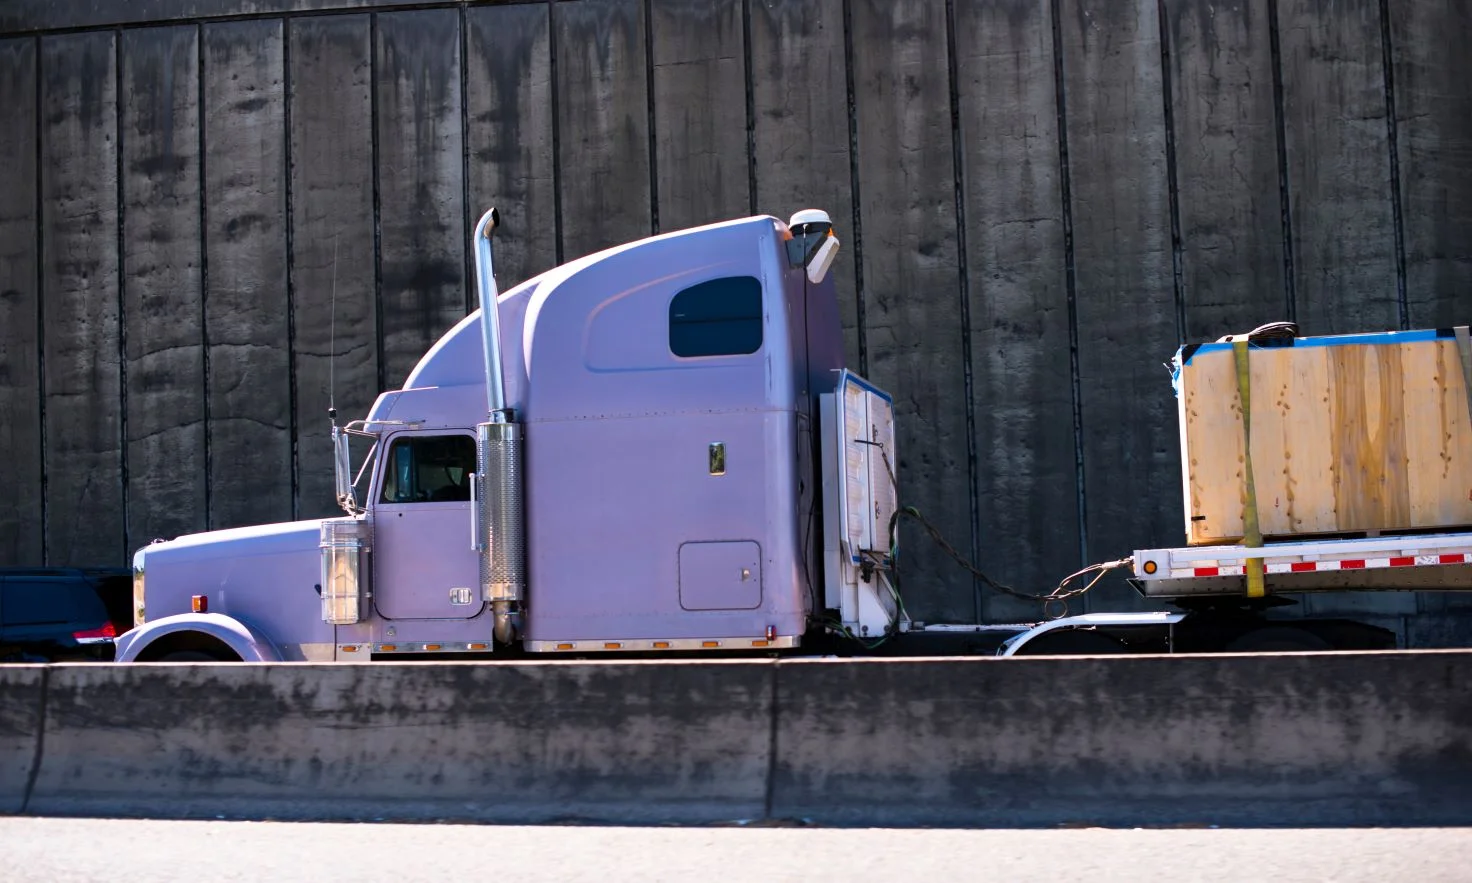 A light-colored semi truck transporting heavy materials driving by a wooden wall.